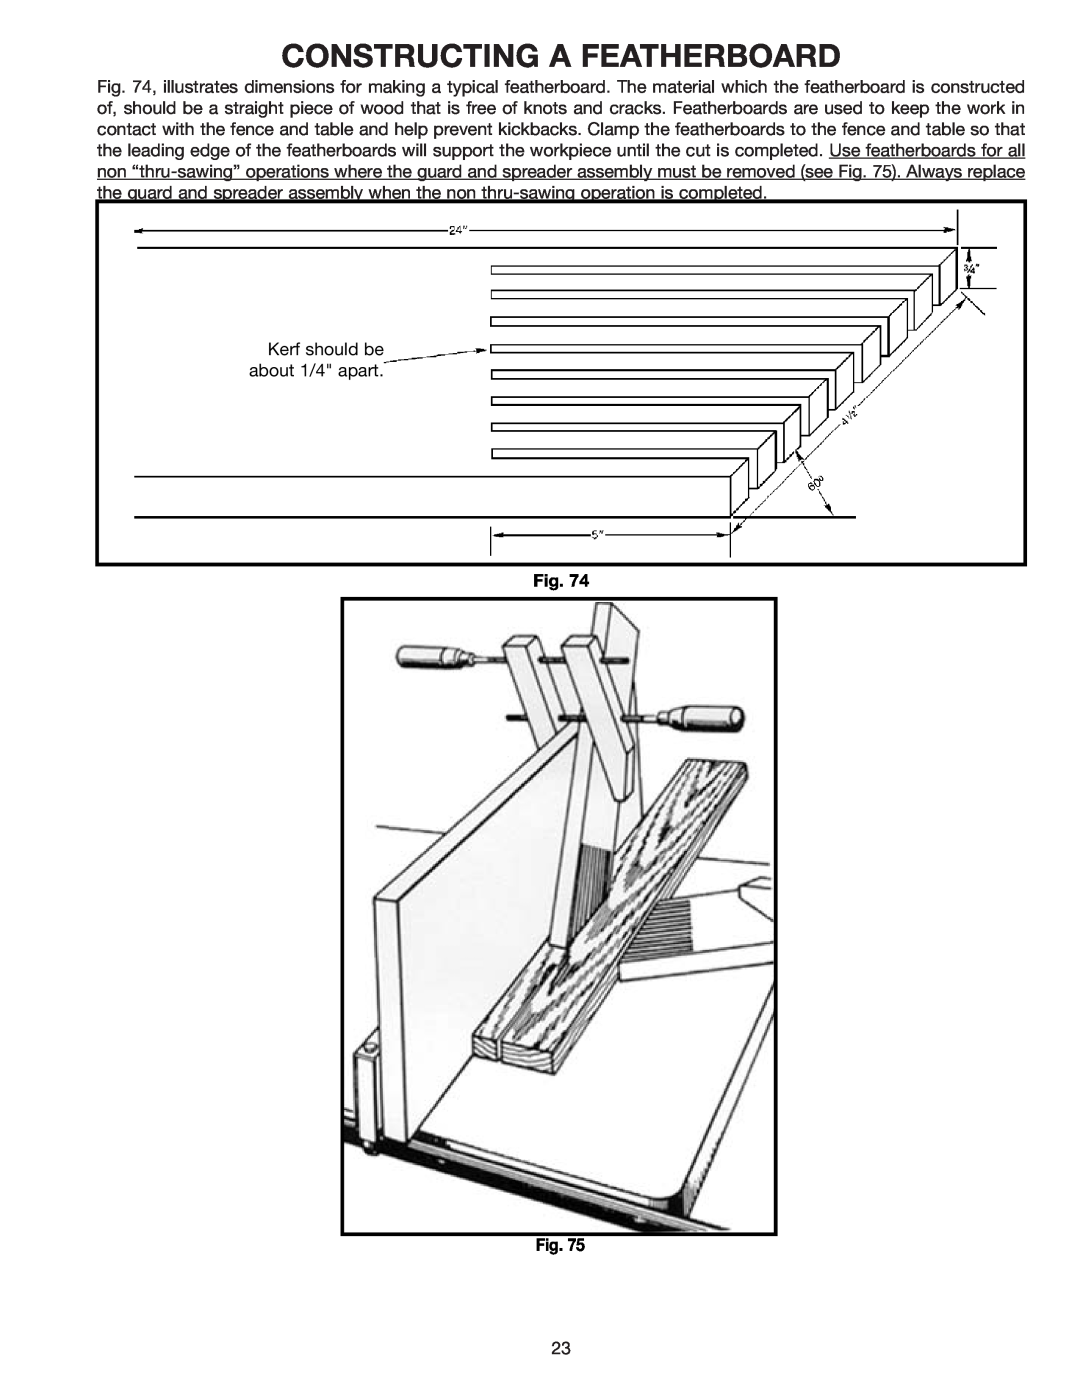 Delta 34-801, 36-812, 34-814, 34-806 instruction manual Constructing A Featherboard, Fig. Fig 